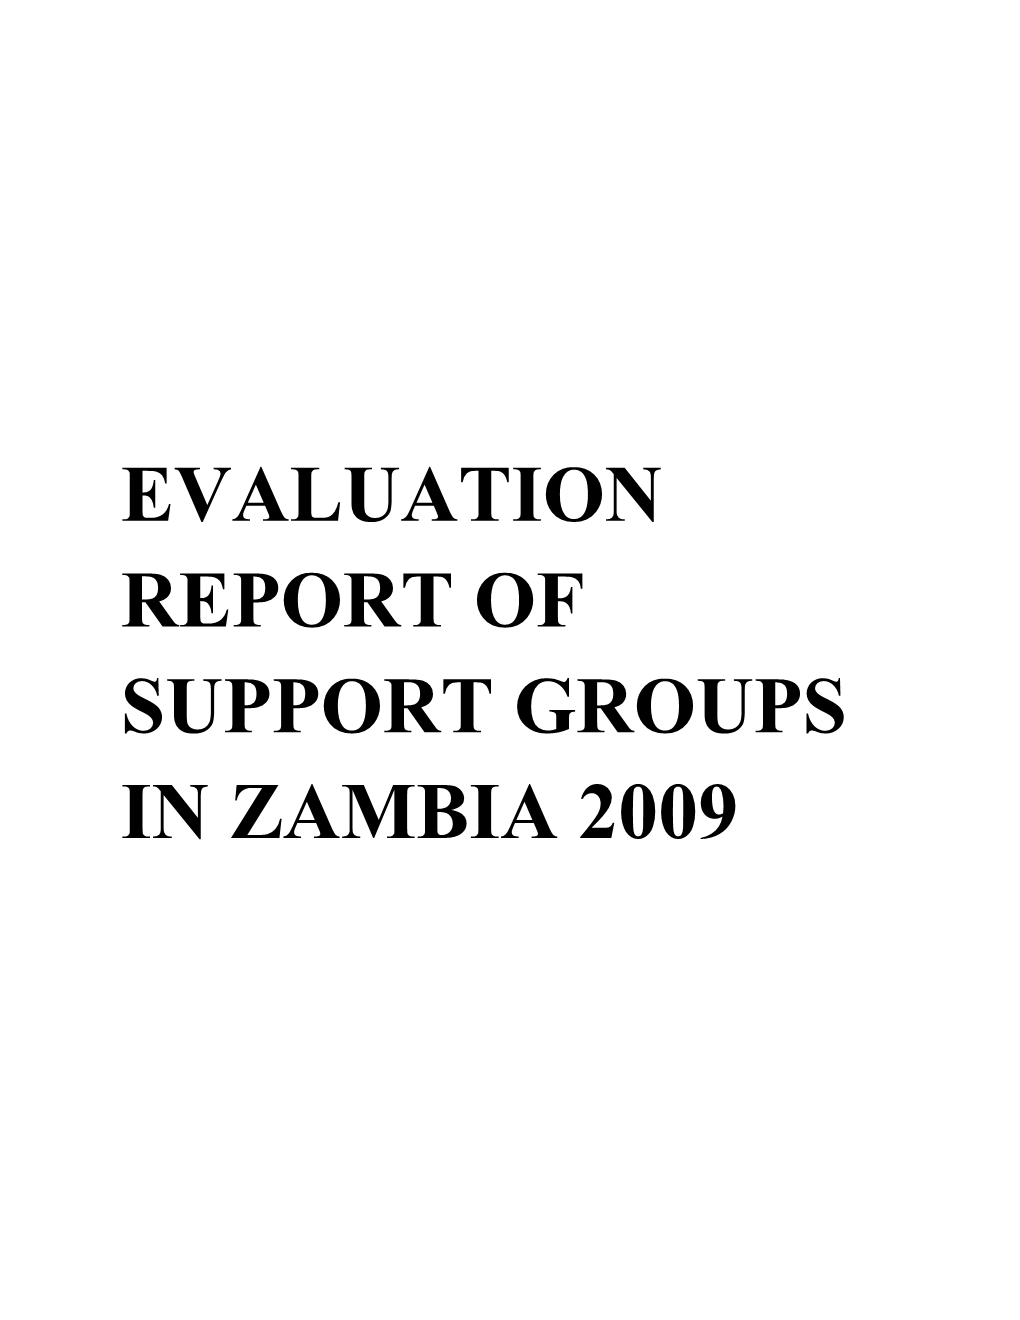 Evaluation Report of Support Groups in Zambia 2009